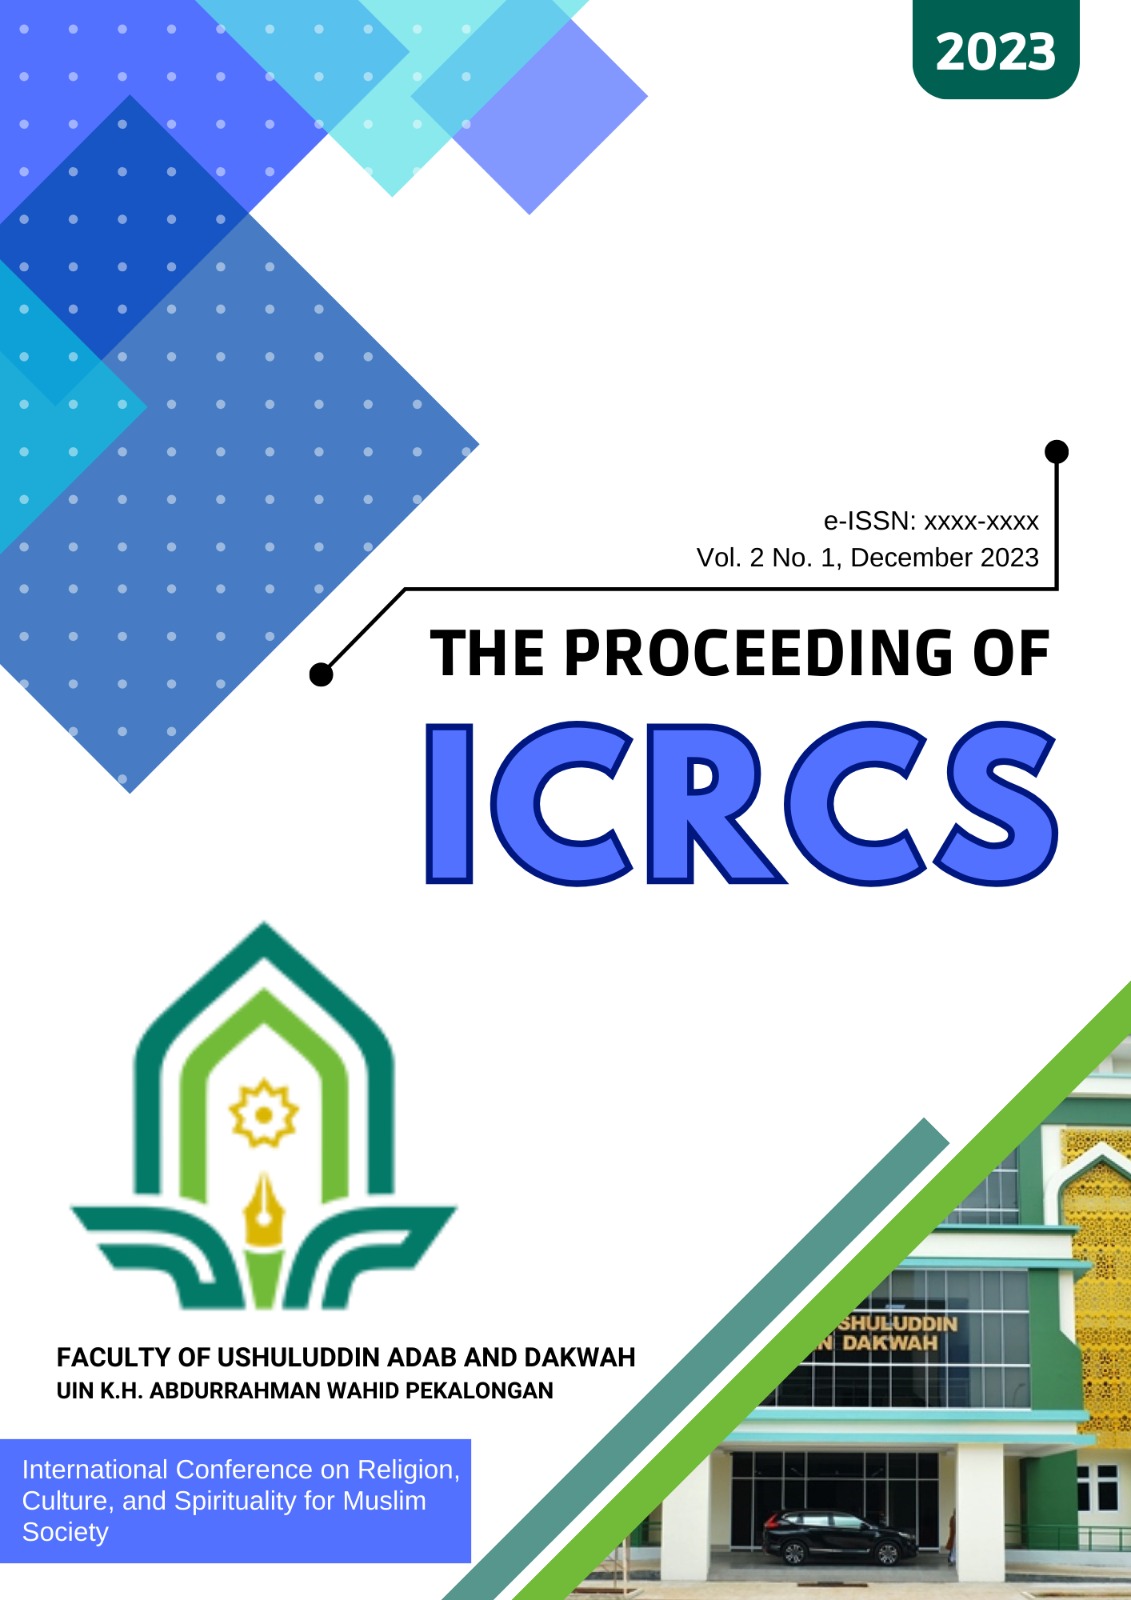 					View Vol. 2 (2023): The Proceeding of ICRCS, December 2023.
				